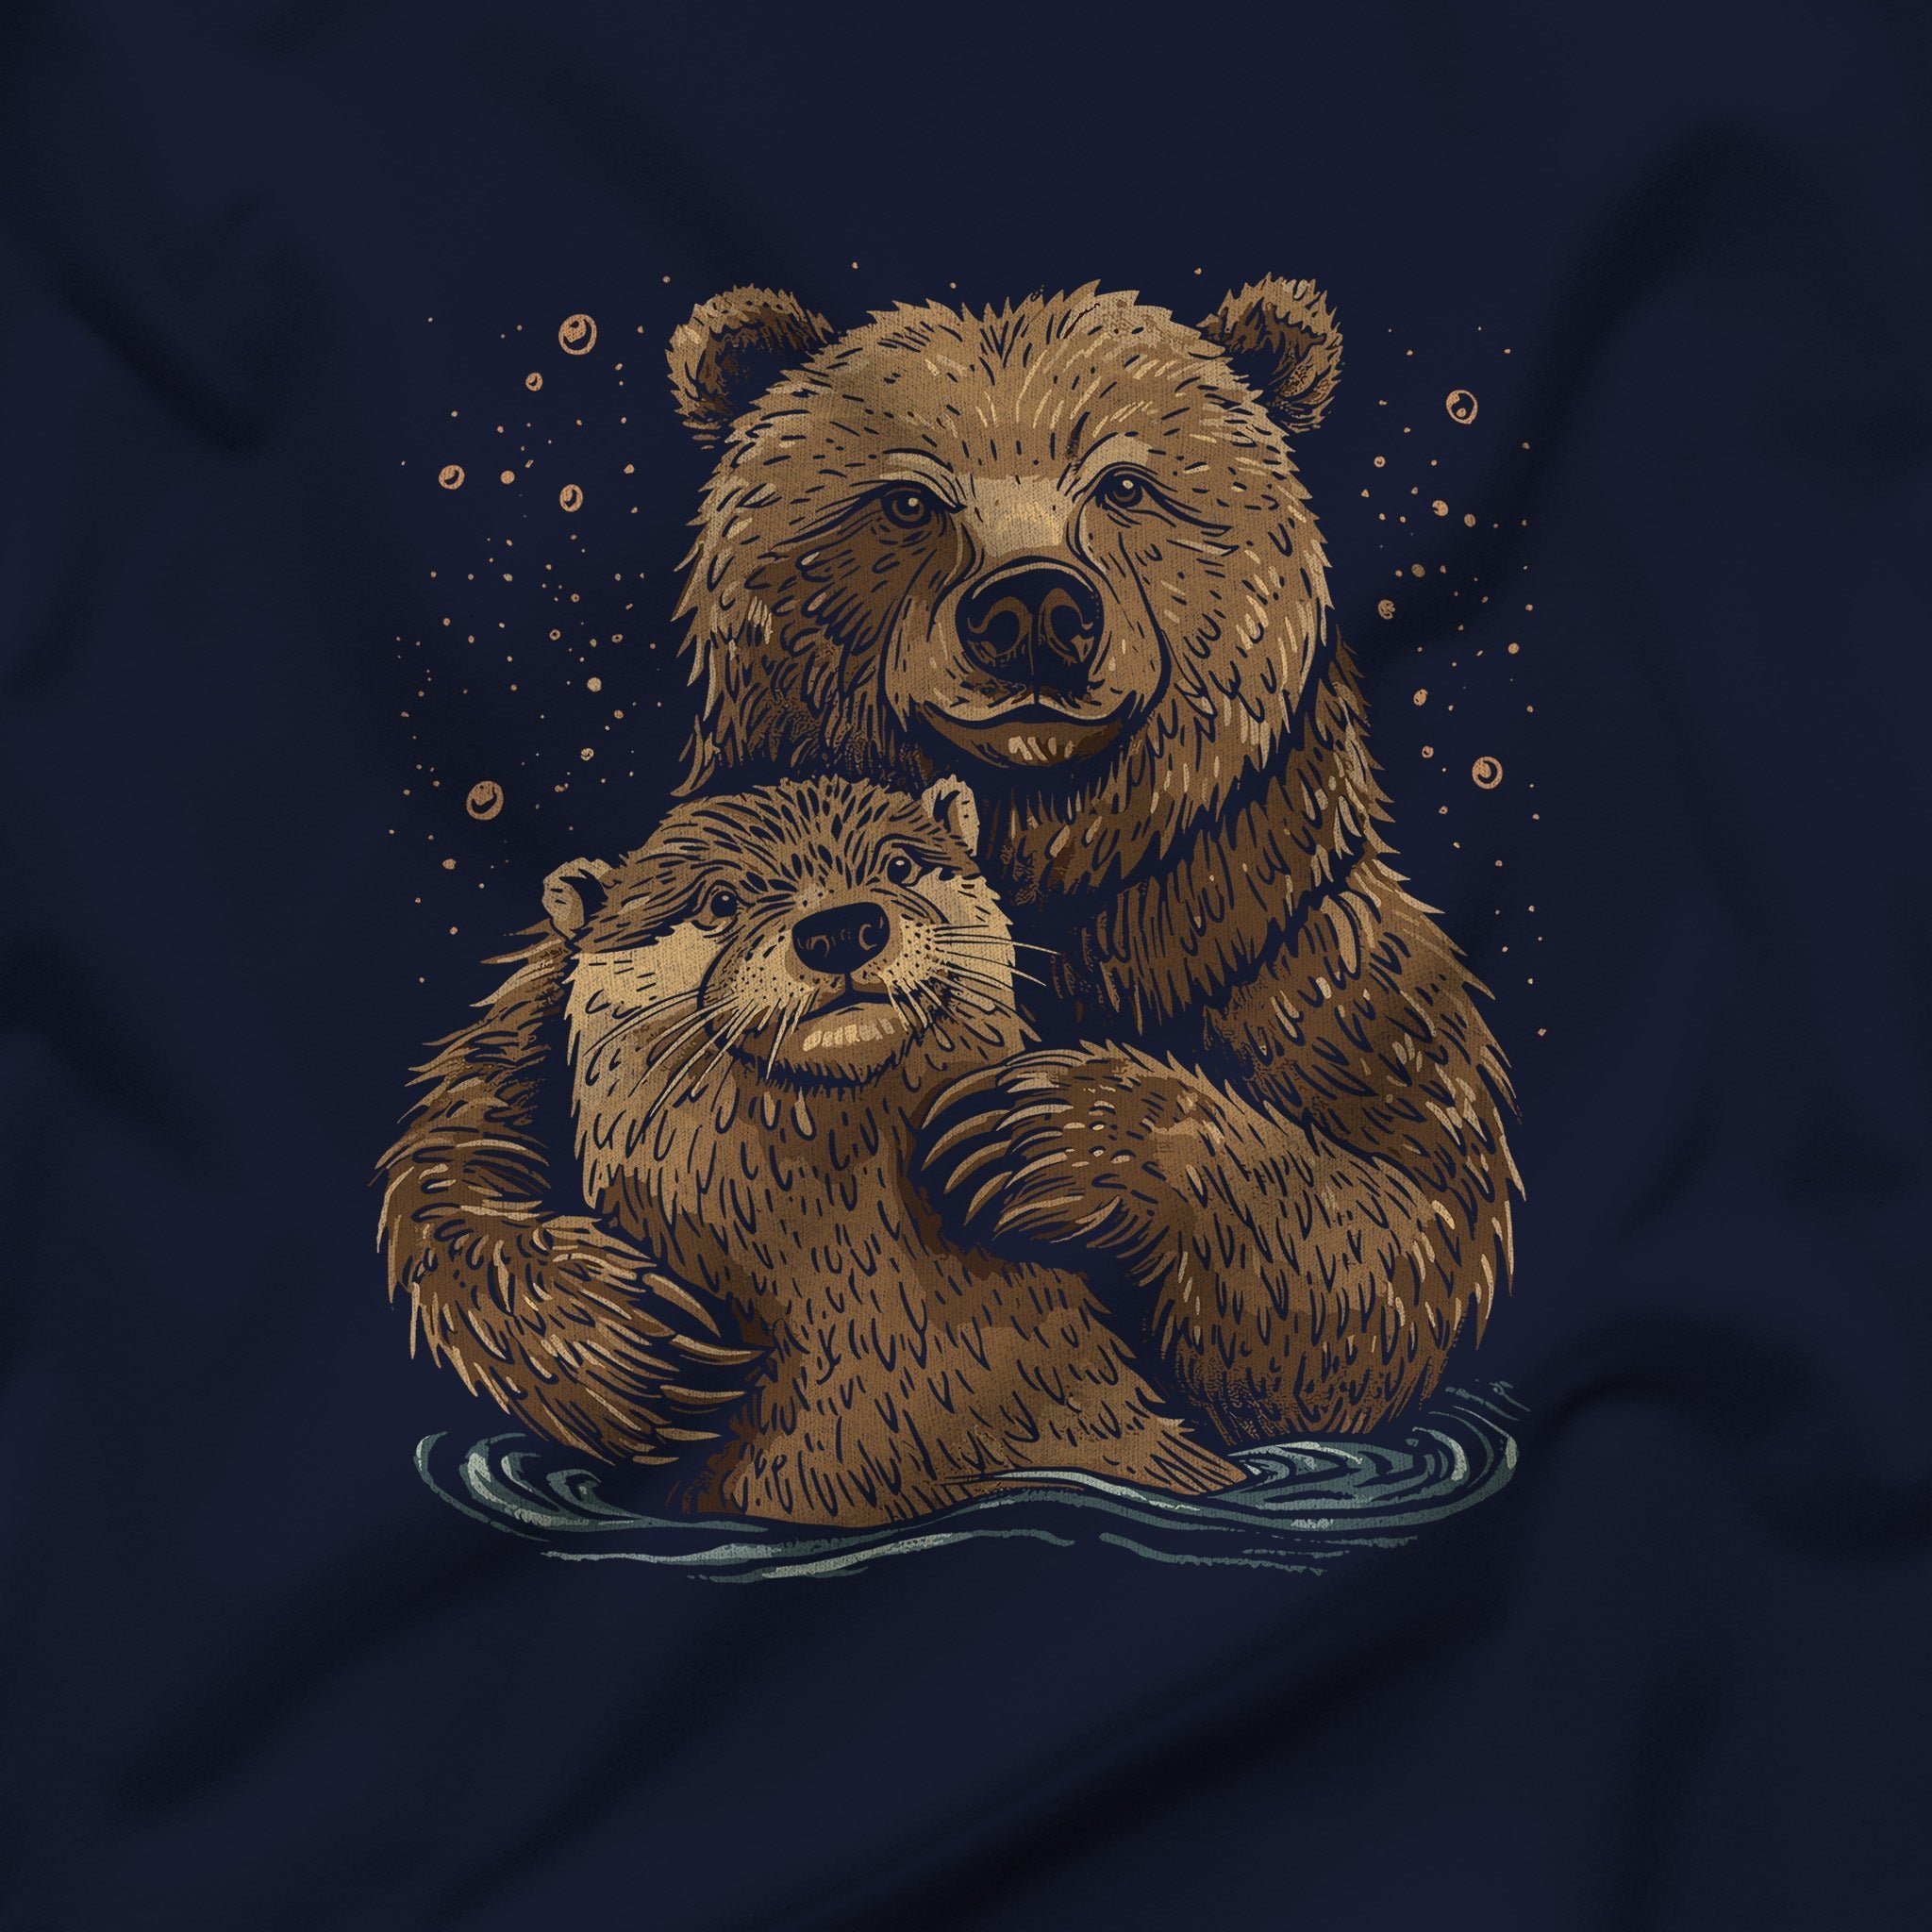 Bear + Otter Tee – Celebrate Companionship - Hunky Tops#color_navy